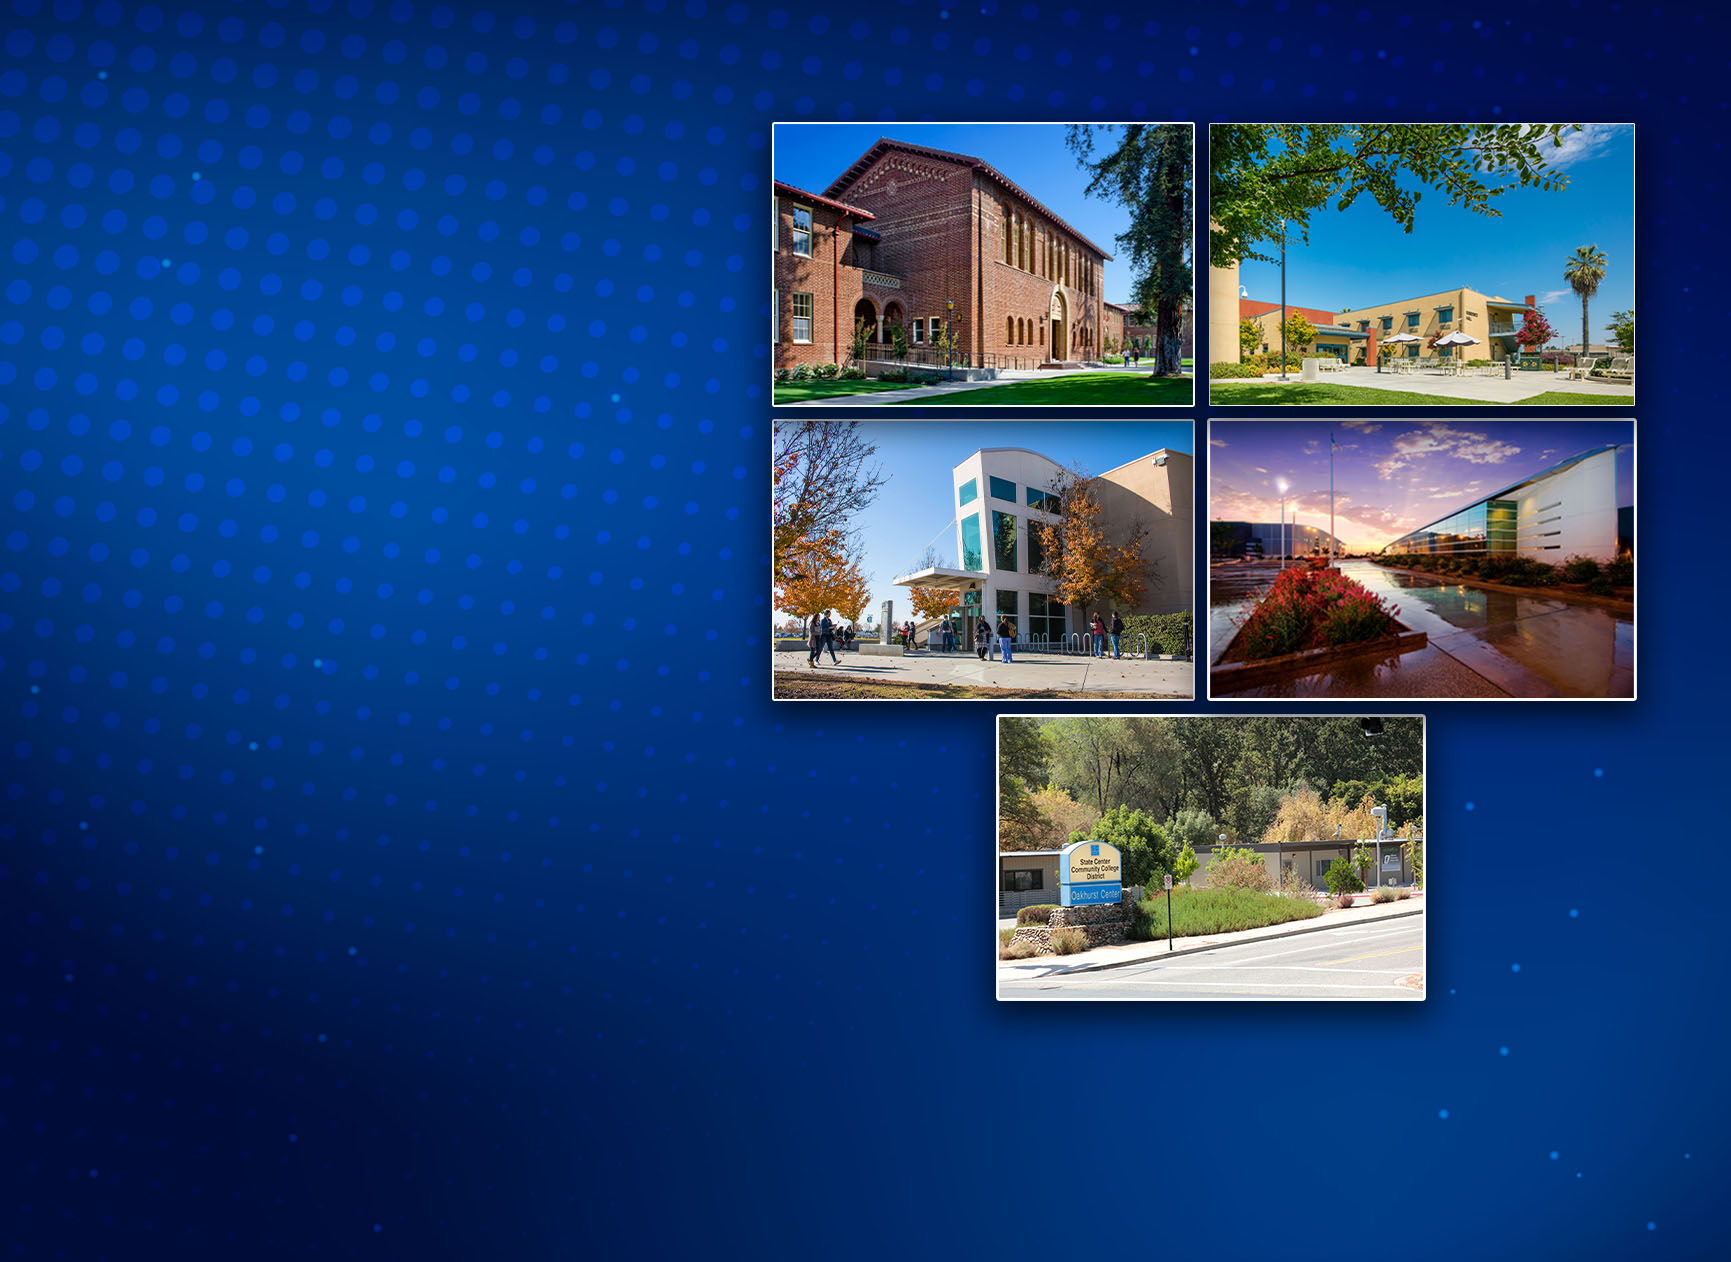 major landmarks of each college campus in the SCCCD district.